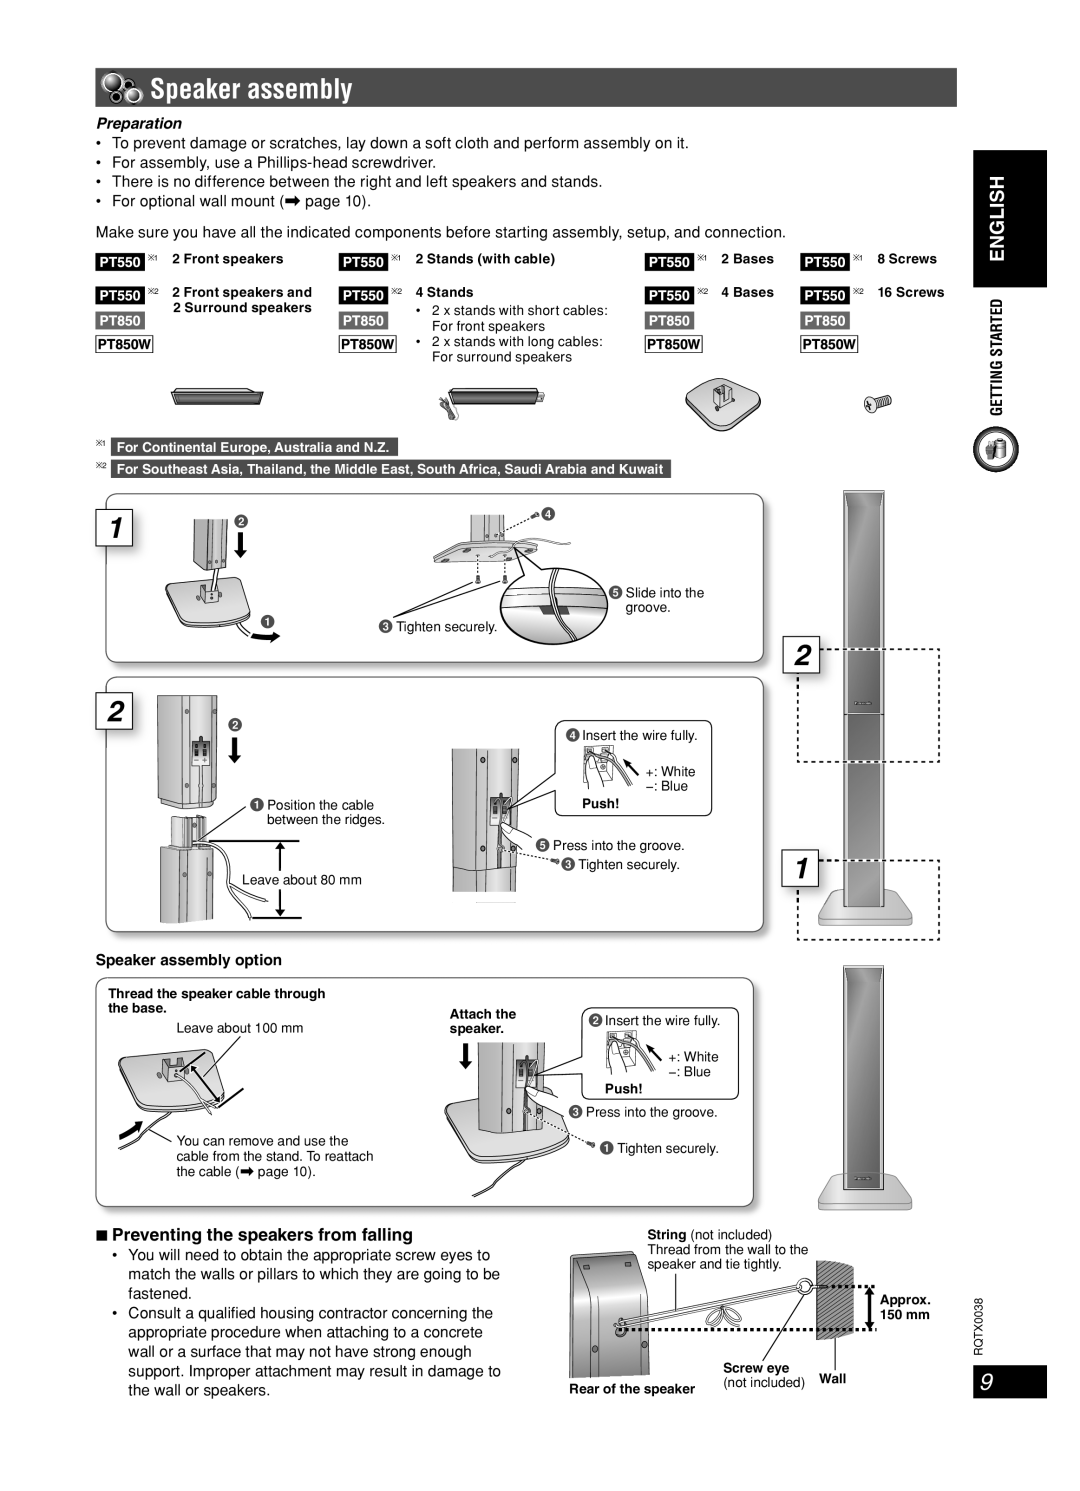 Panasonic SC-PT550, SC-PT850 Speaker assembly, 7Preventing the speakers from falling, Preparation, Getting Started English 